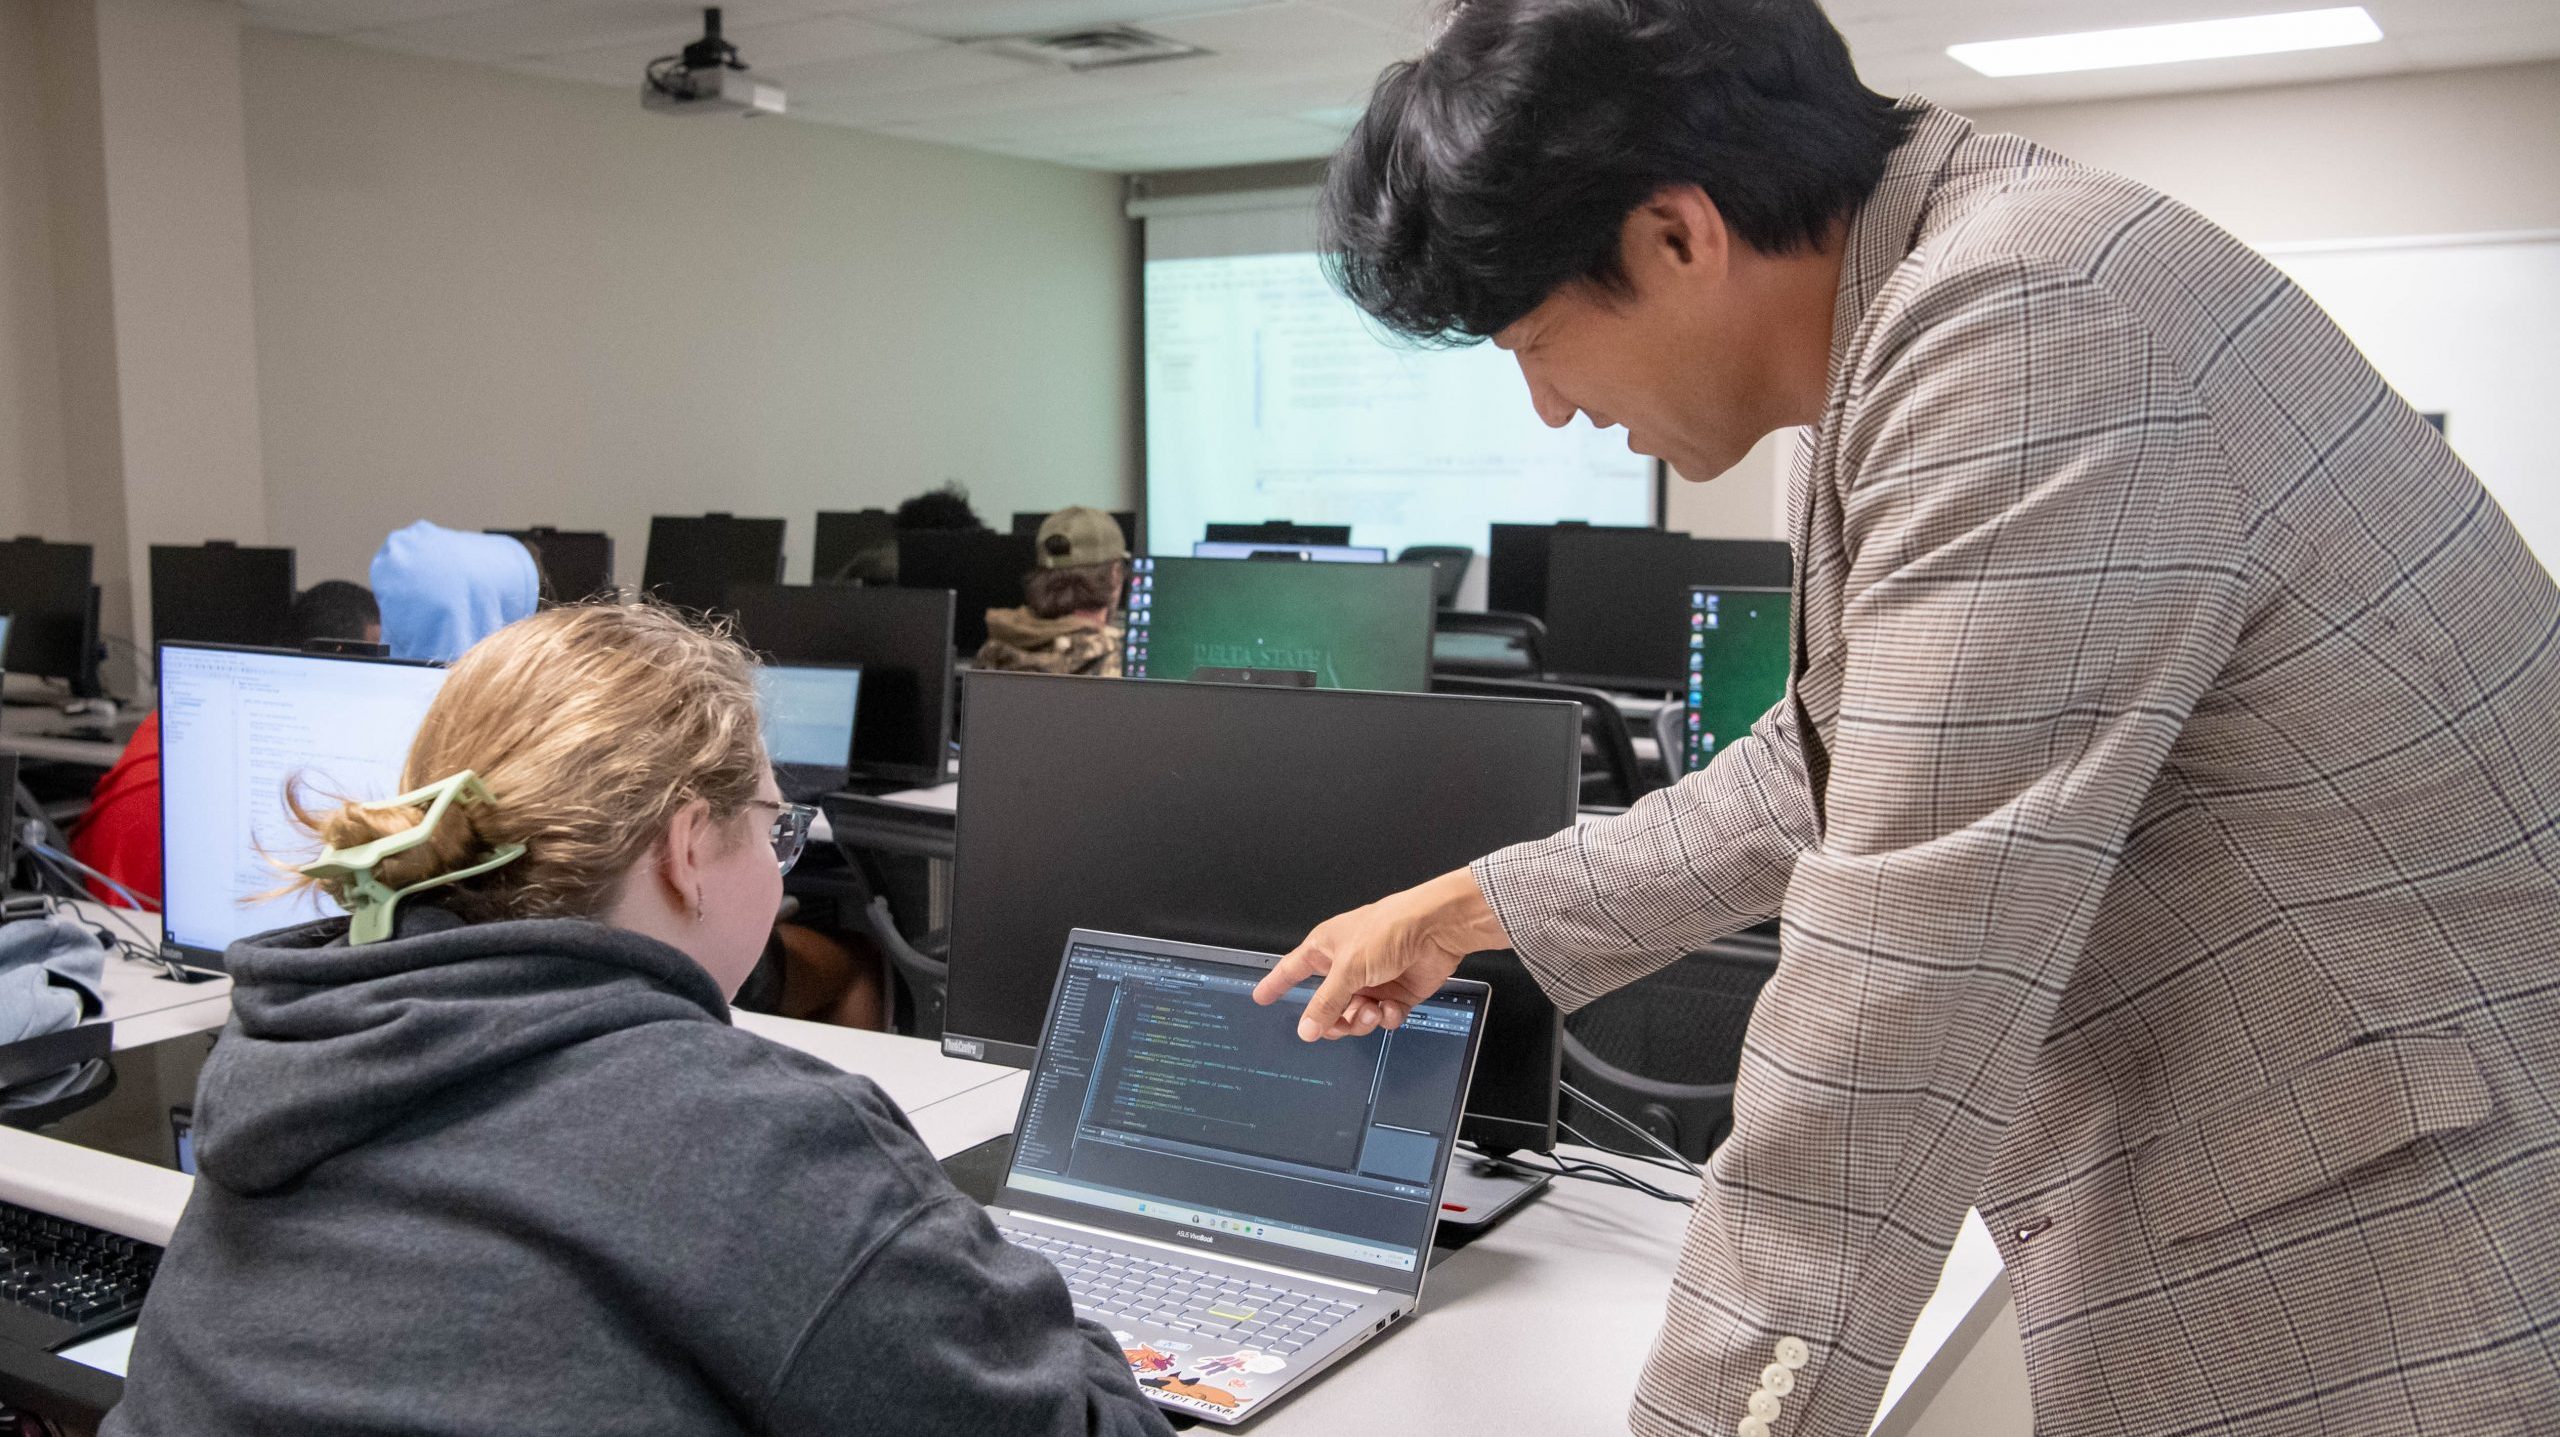 Professor in classroom pointing at code on students laptop screen.